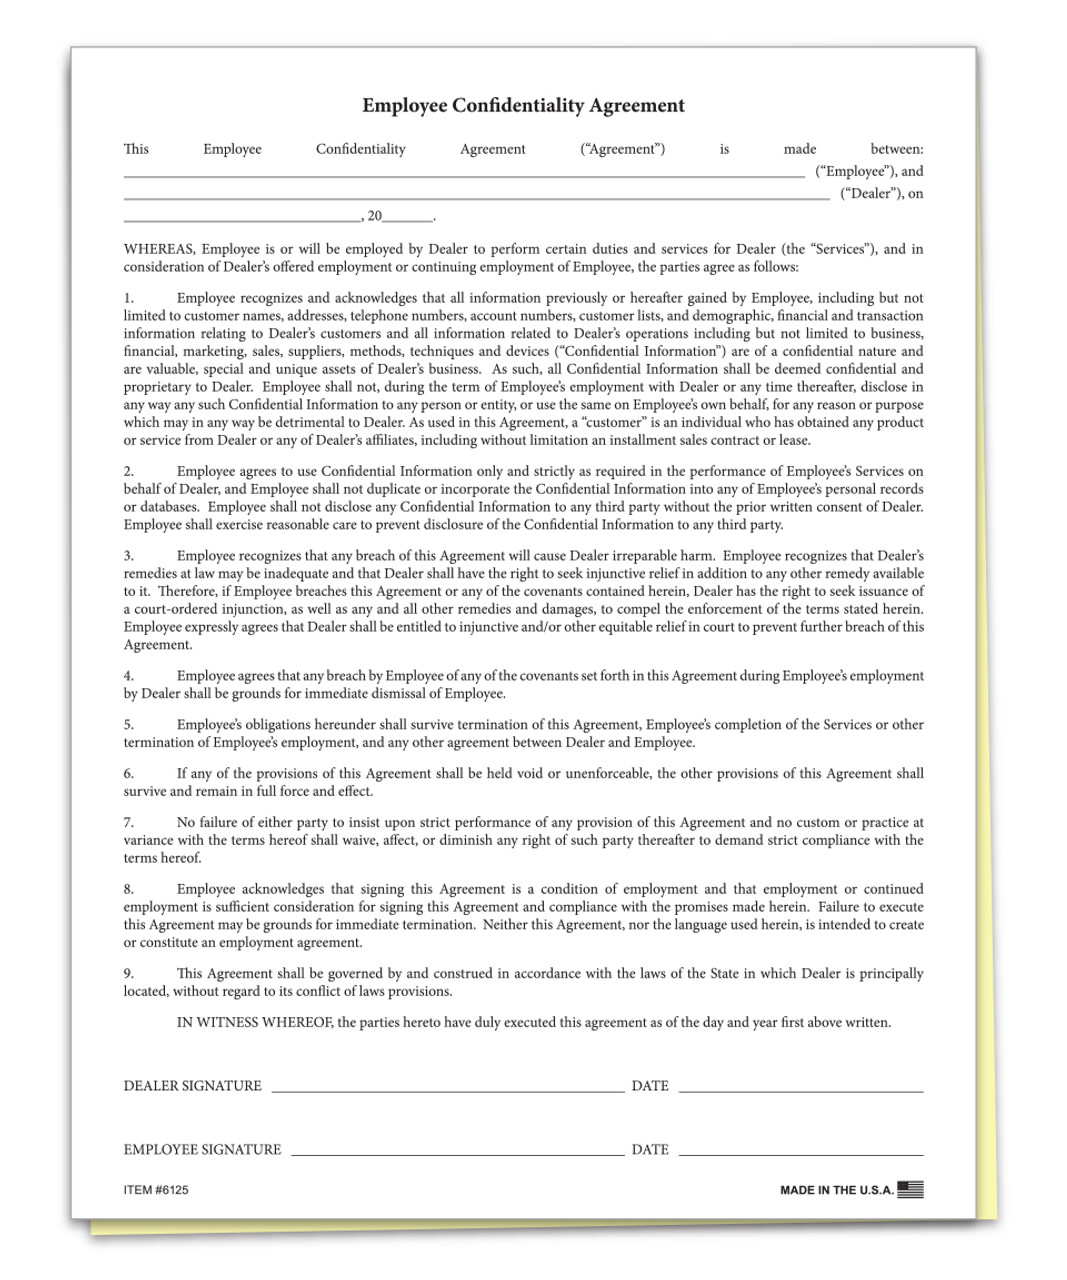 Employee Confidentiality Agreement Form - Qty of 100